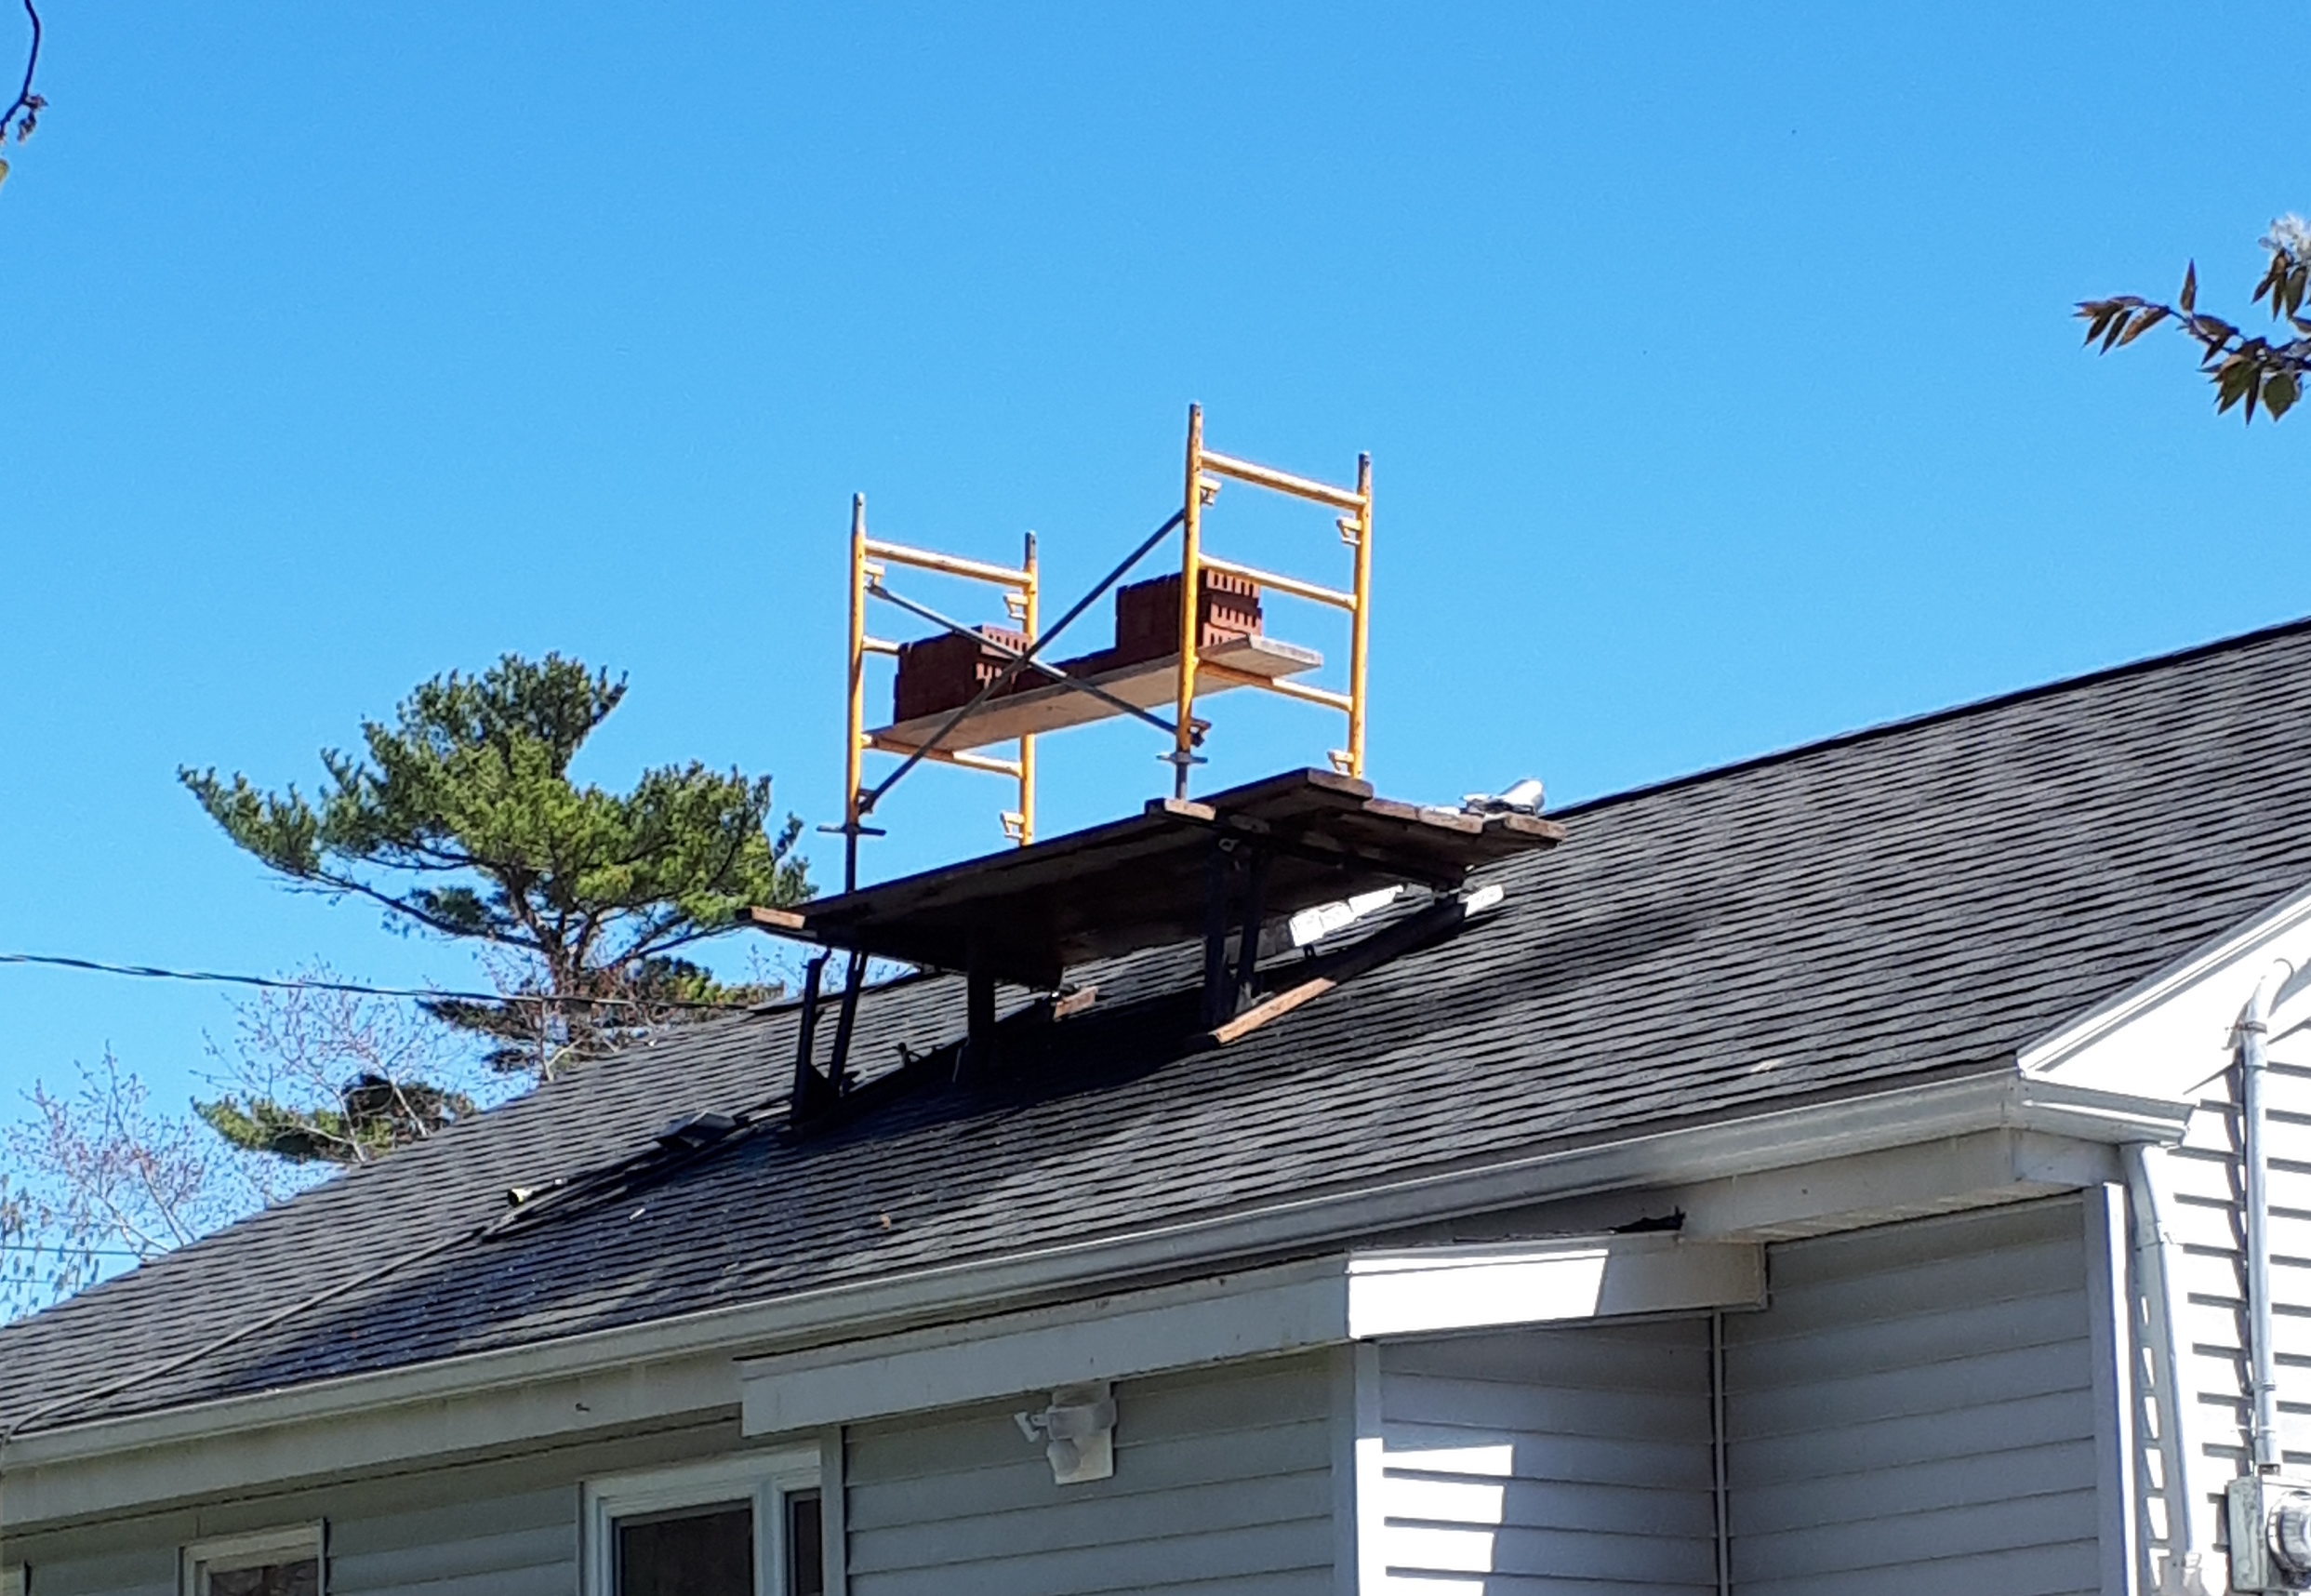 image of chimney construction-rebuild services completed in Fall River, NS by Pro Chimney Services based in Halifax, NS servicing all of the Halifax-Dartmouth Regional Municipality, Bedford, Sackville, Mount Uniacke, Windsor, Hantsport , Wolfville, Kentville, Chester, Mahone Bay, Lunenburg, Bridgewater, Liverpool, Fall River, Wellington, Enfield, Elmsdale, Brookfield, Truro, Musquodoboit Harbour & surrounding areas.